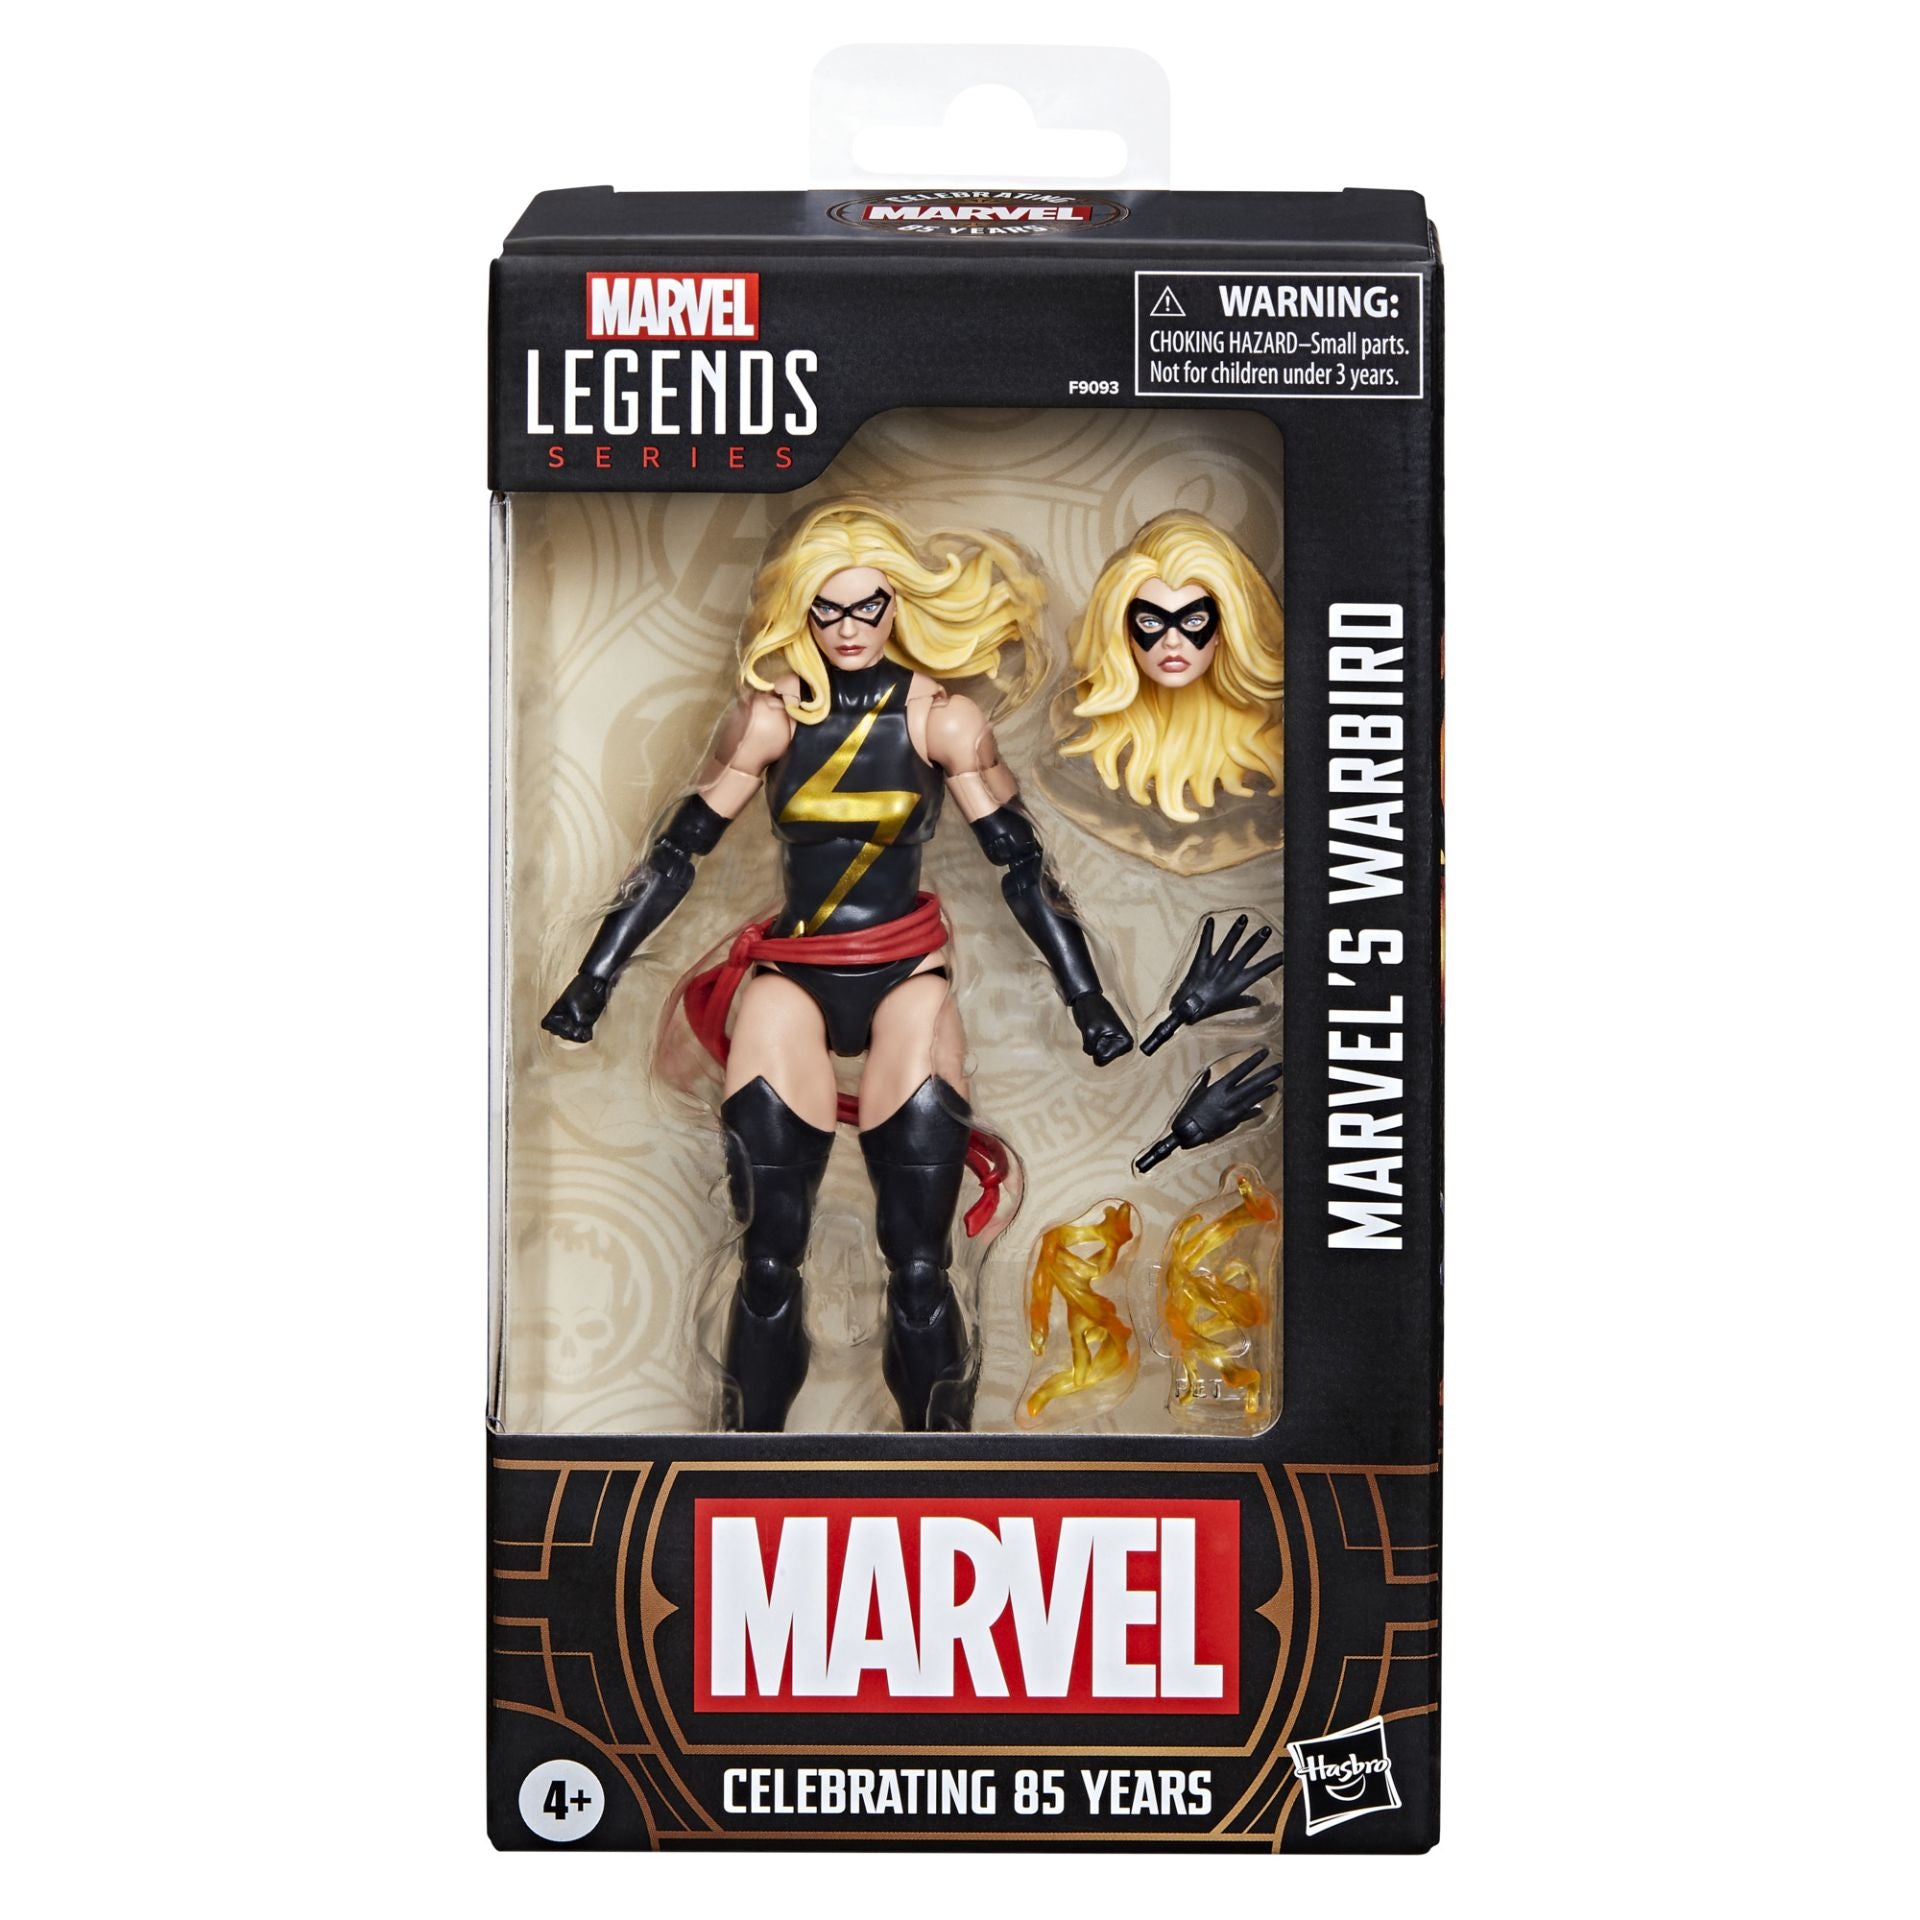 Marvel Legends Legacy Collection 6" Warbird Carol Danvers 85th Anniversary Comic